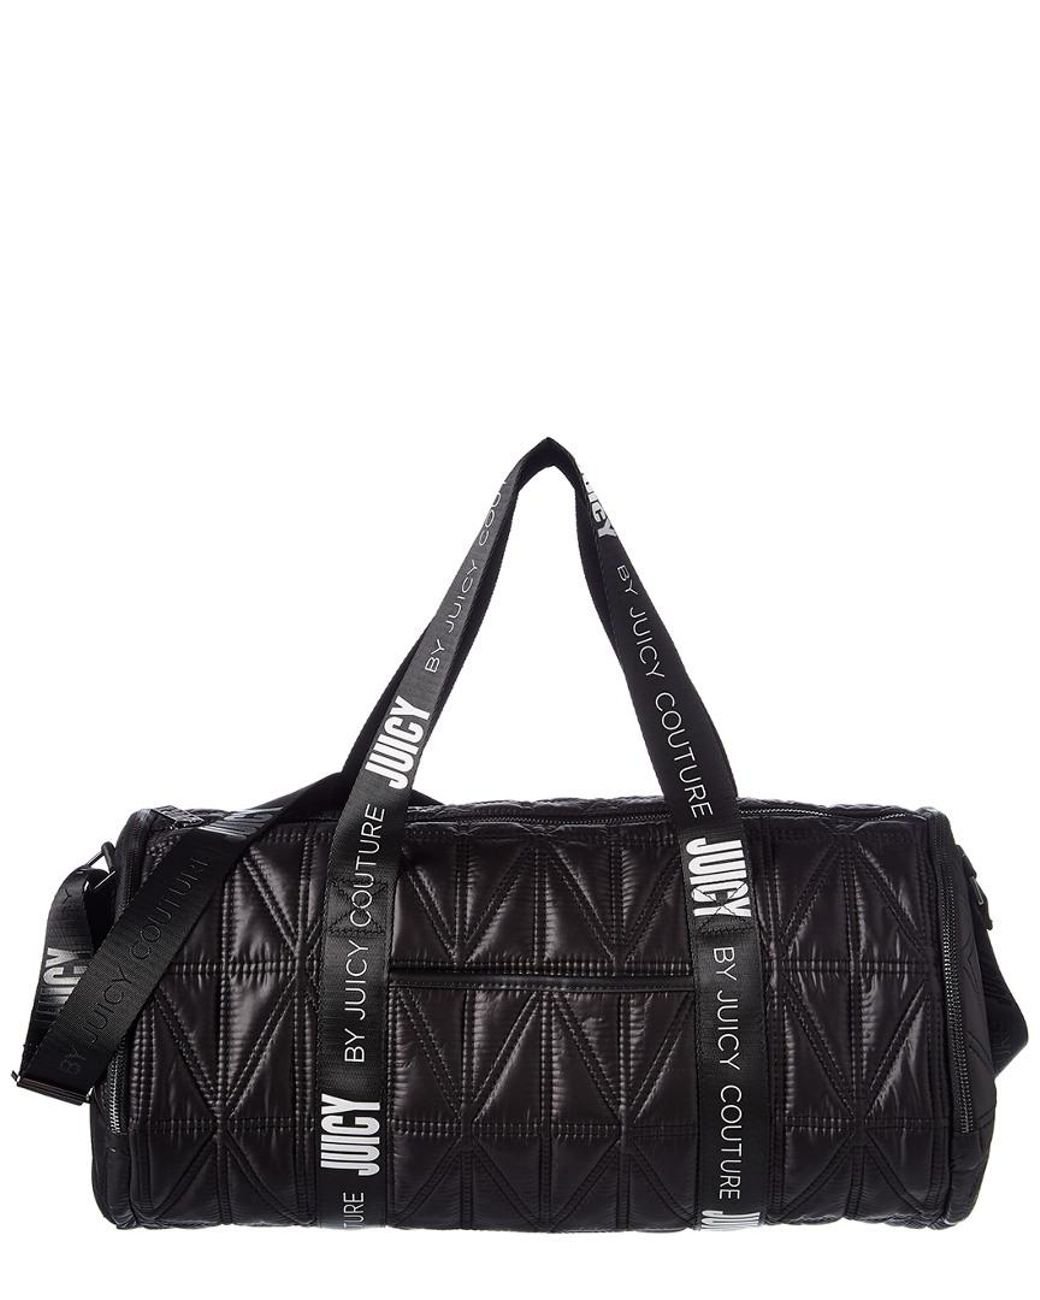 Juicy Couture Sunset Barrel Gym Bag in Black | Lyst